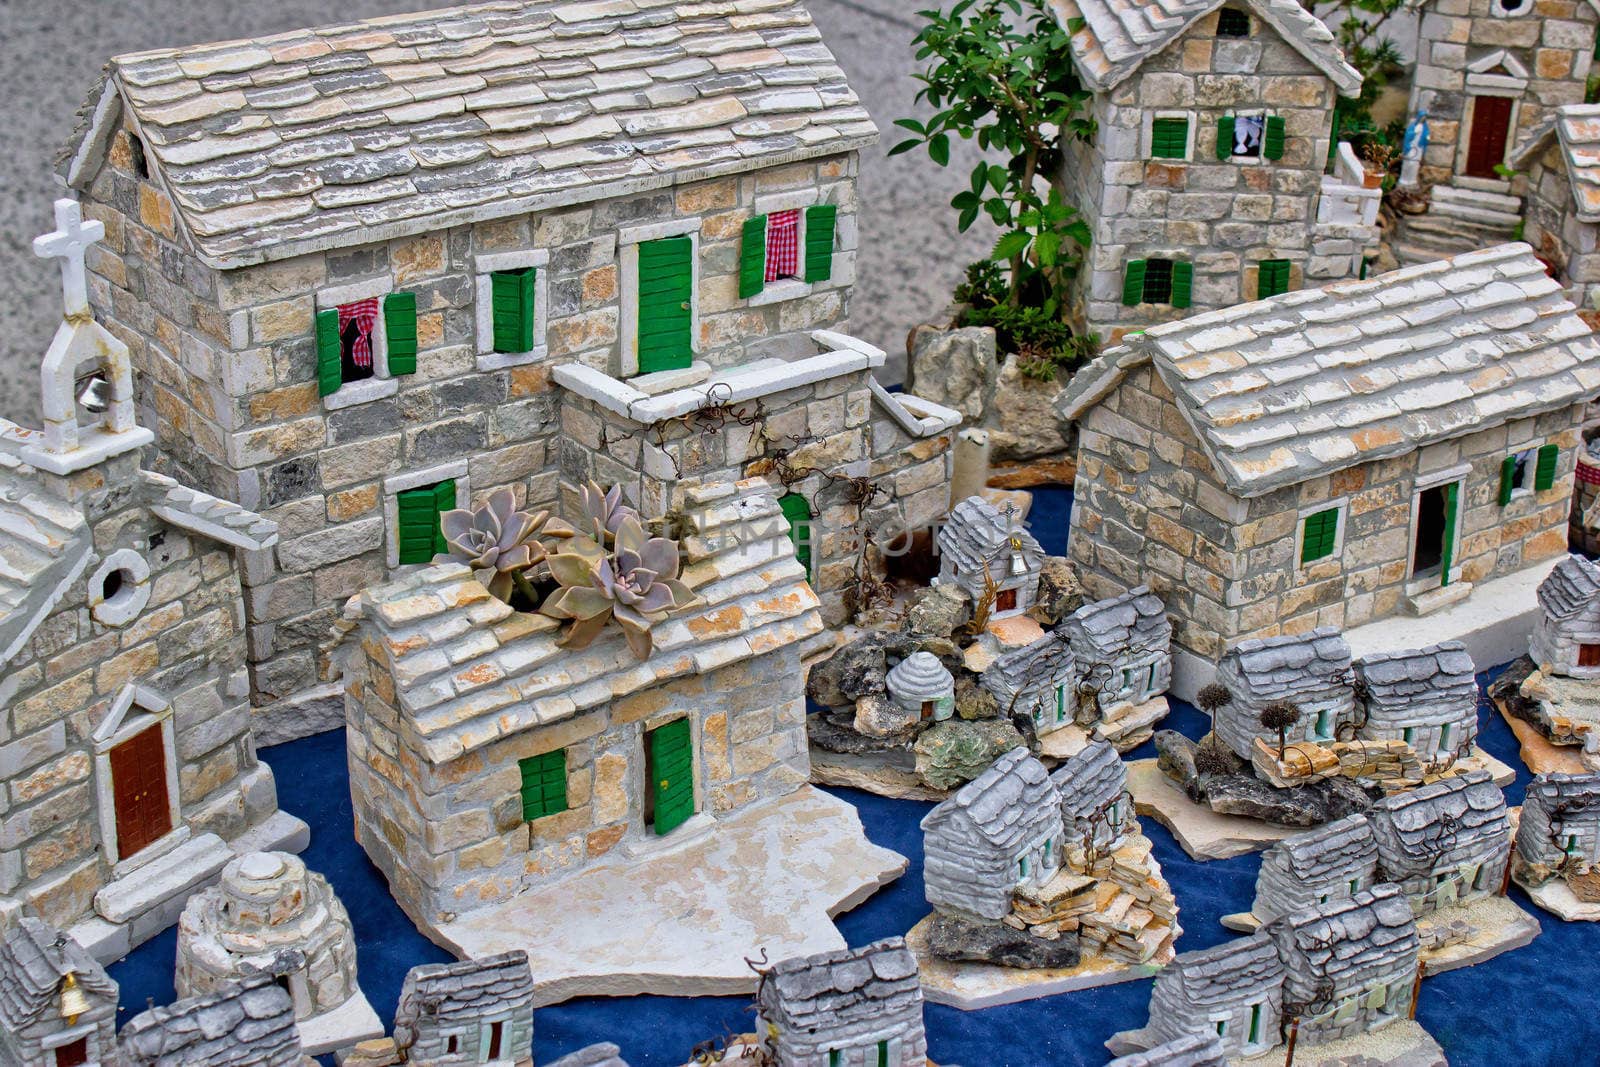 Mediterranean style stone village model, stone houses and church